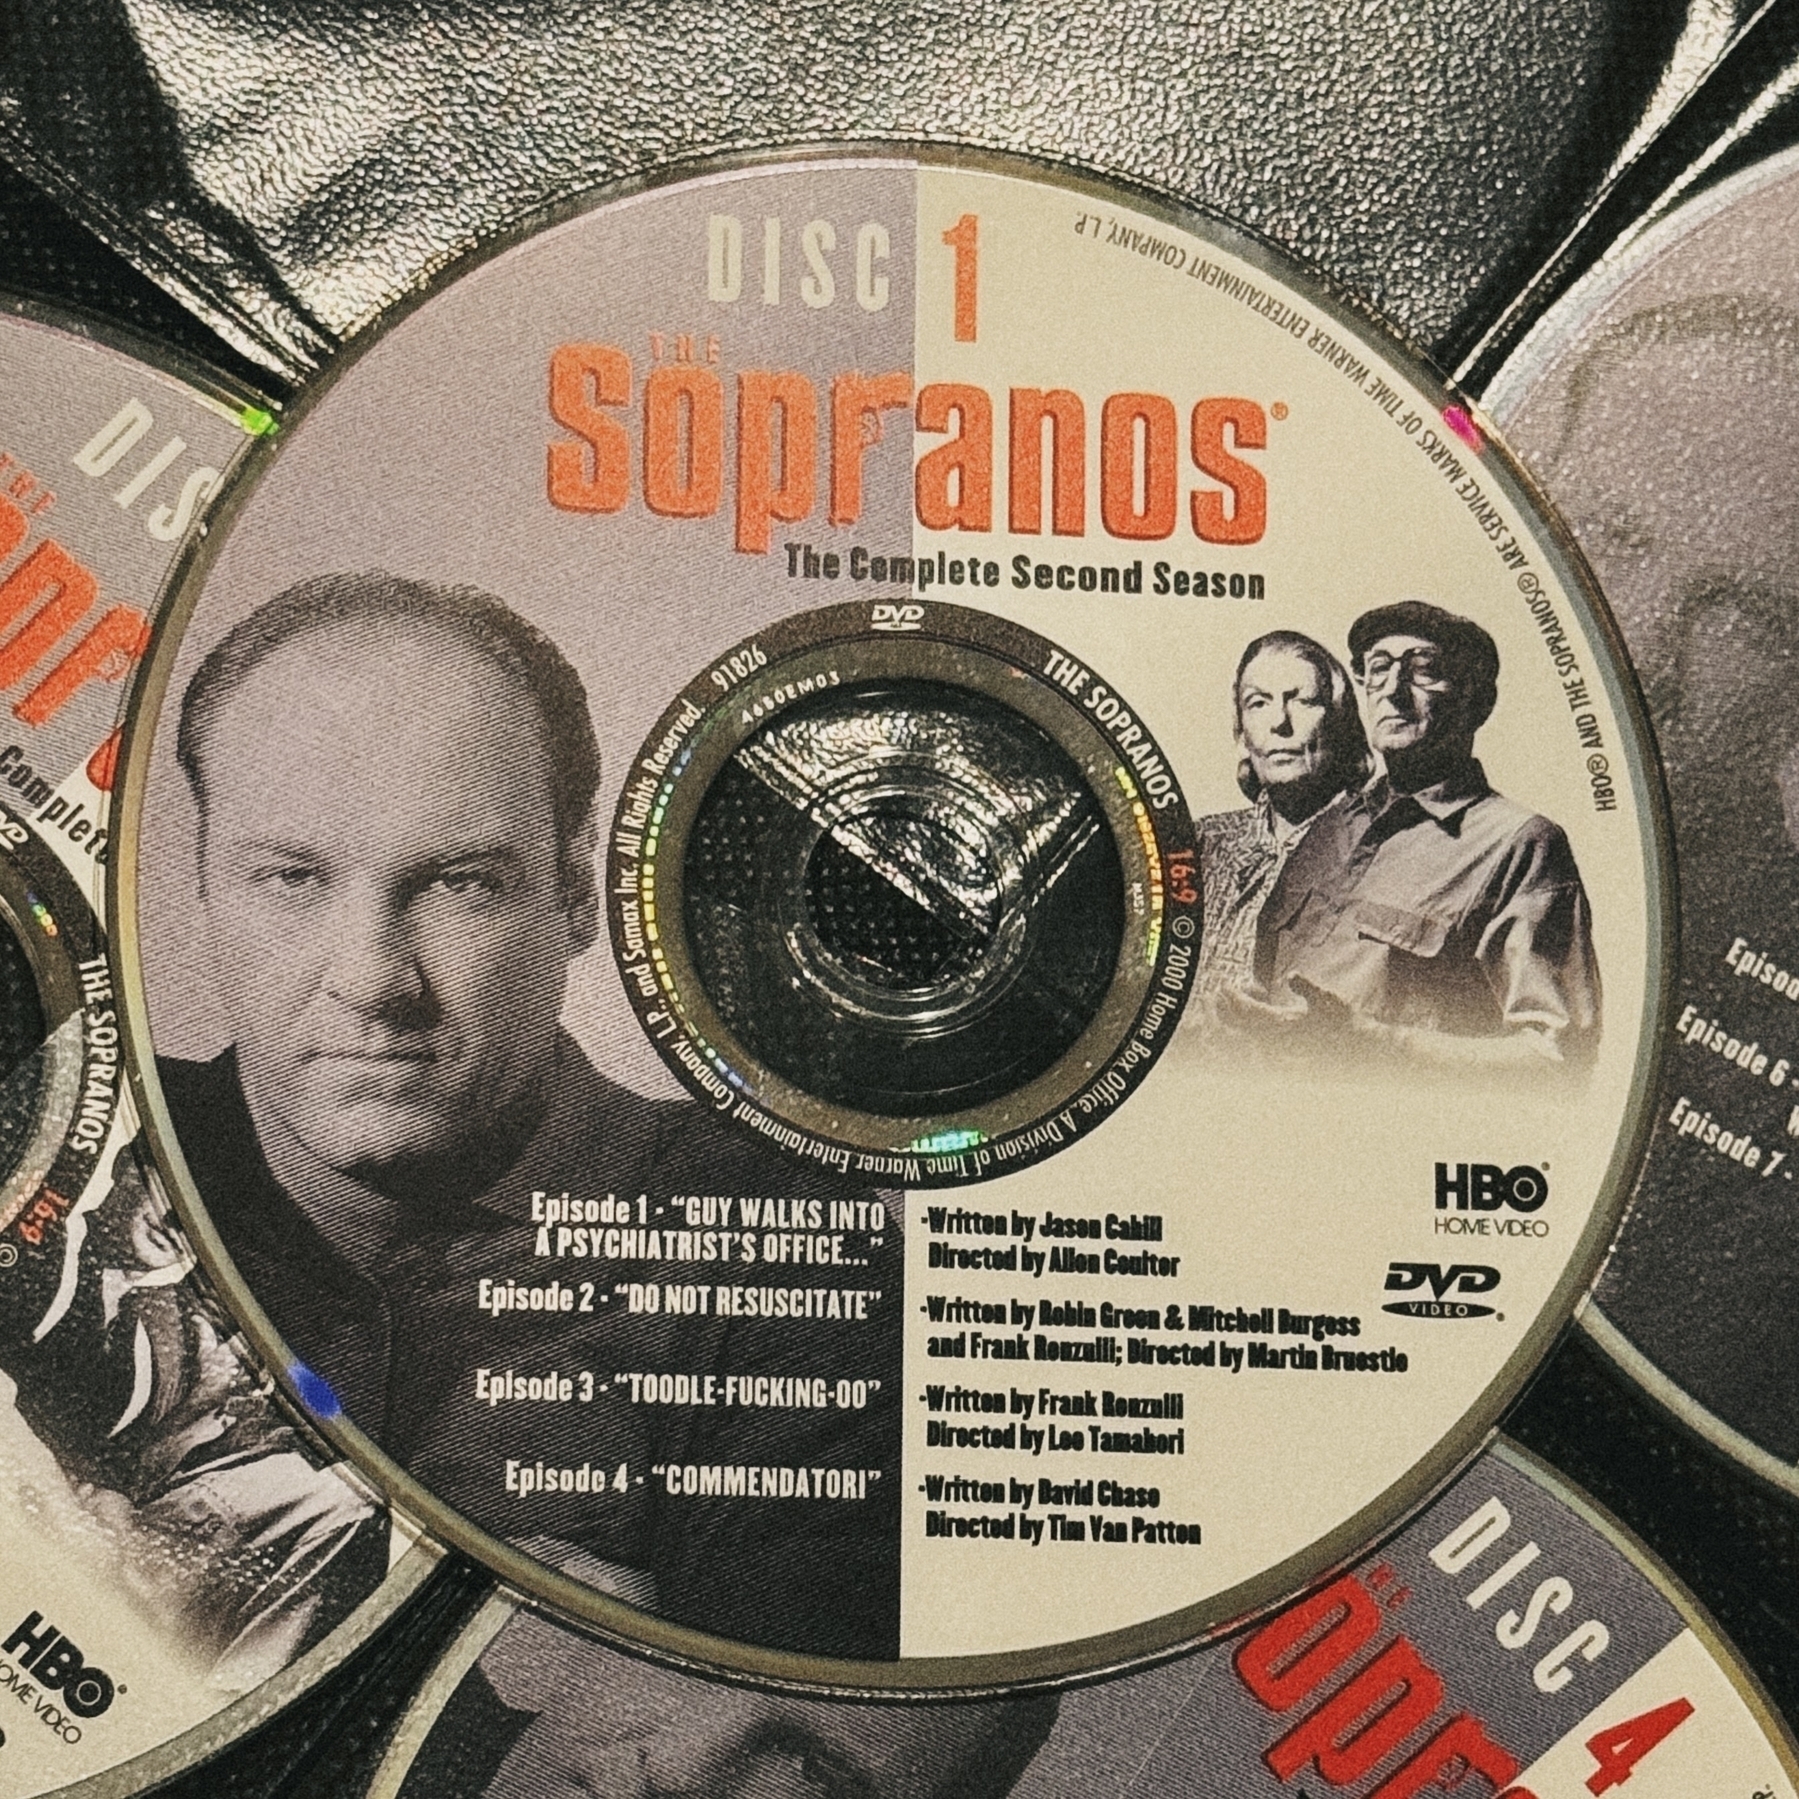 DVD disc of the first episode of the sopranos sitting atop a grid of other discs in an old black disc portfolio booklet